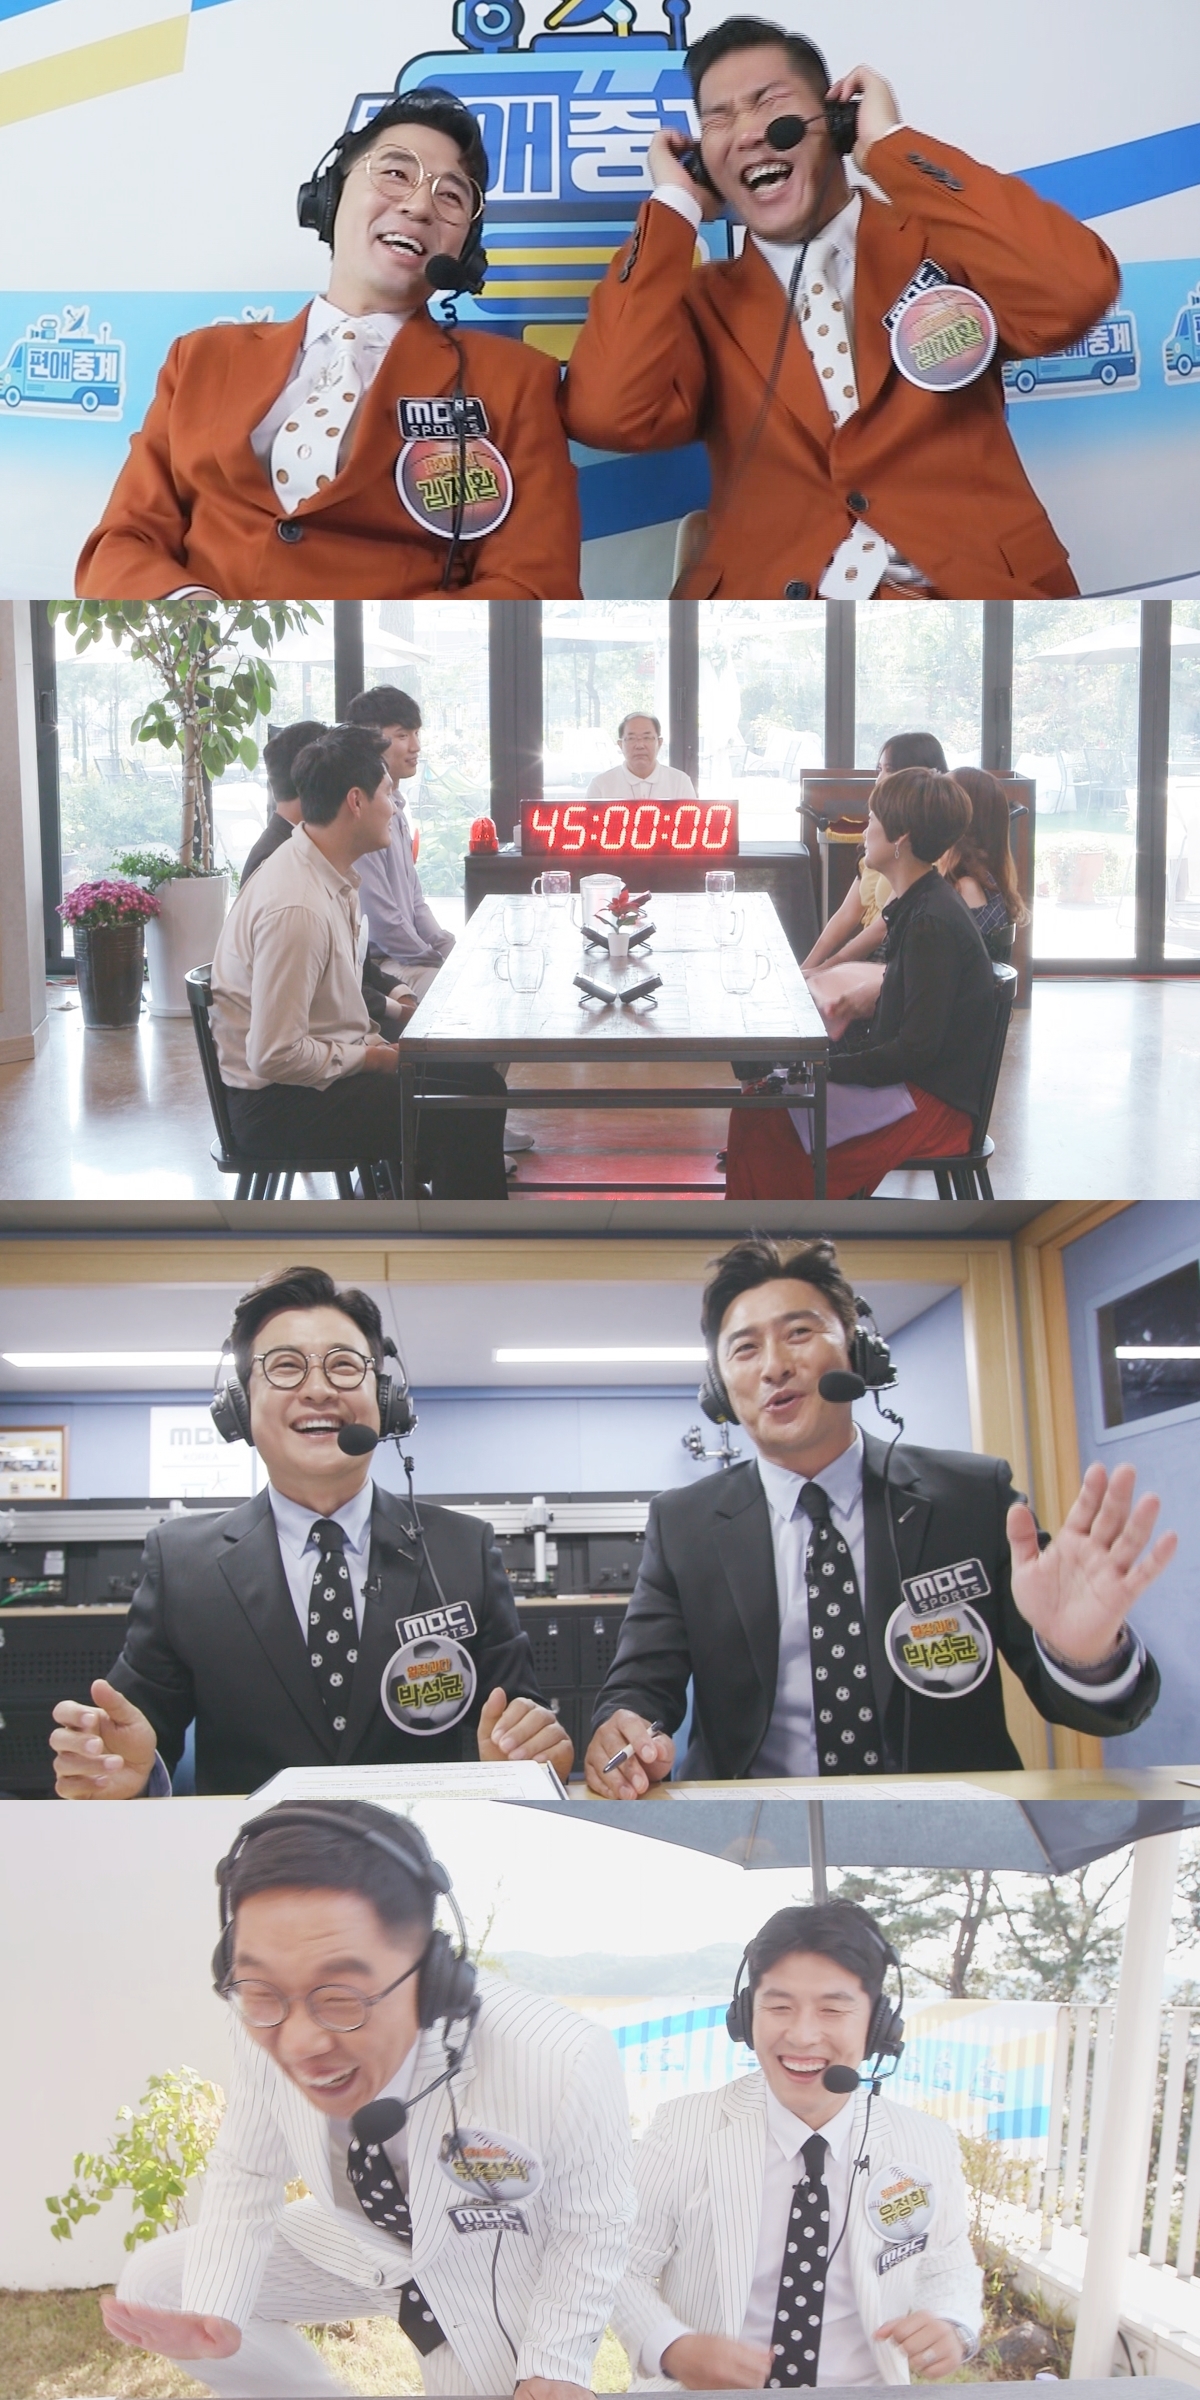 Seoul = = Park Bo-gum and Lee Jung-jae appeared in Favoritism later?MBCs new entertainment program Favoritism Later, which will be broadcasted for the first time on the afternoon of the 5th, will be featured on the Yon, Mot. Nam (Loveless Man) acquaintances of Seo Jang-hoon, Ahn Jung-hwan and Kim Byung-hyun.After the blind date Pilot broadcast of the three island bachelors who got a hot reaction, they went to the thumb relay once again at the request of the relay.Seo Jang-hoon is a high school teacher and a junior who has been a professional basketball player, and Ahn Jung-hwan is a managers brother-in-law, a broadcasting team, a judo player, and a trot singer.Kim Byung-hyun also introduces a junior who is in charge of performance training for sports players.The three relays that were fighting the sparkling nerves are already saying that they have poured out all kinds of contacts for my side, saying, I thought it was Park Bo-gum and Lee Jung-jae.The one pitcher who will win the basketball, soccer, and baseball teams that are fiercely Sampa, who will be the pond man who summons the top stars of the Republic of Korea, raises questions about who will be the winner.Favoritism later production team said, The cast suggested the idea first that it would be good to invite their acquaintances after Pilot broadcast and make a blind date.Thanks to this, I selected it as a special feature of this regular program. I have a lot of new items to show you in the future, so I would like to continue to ask for your expectations and interest.Meanwhile, Favoritism later will be broadcasted at 9:50 pm on the 5th.